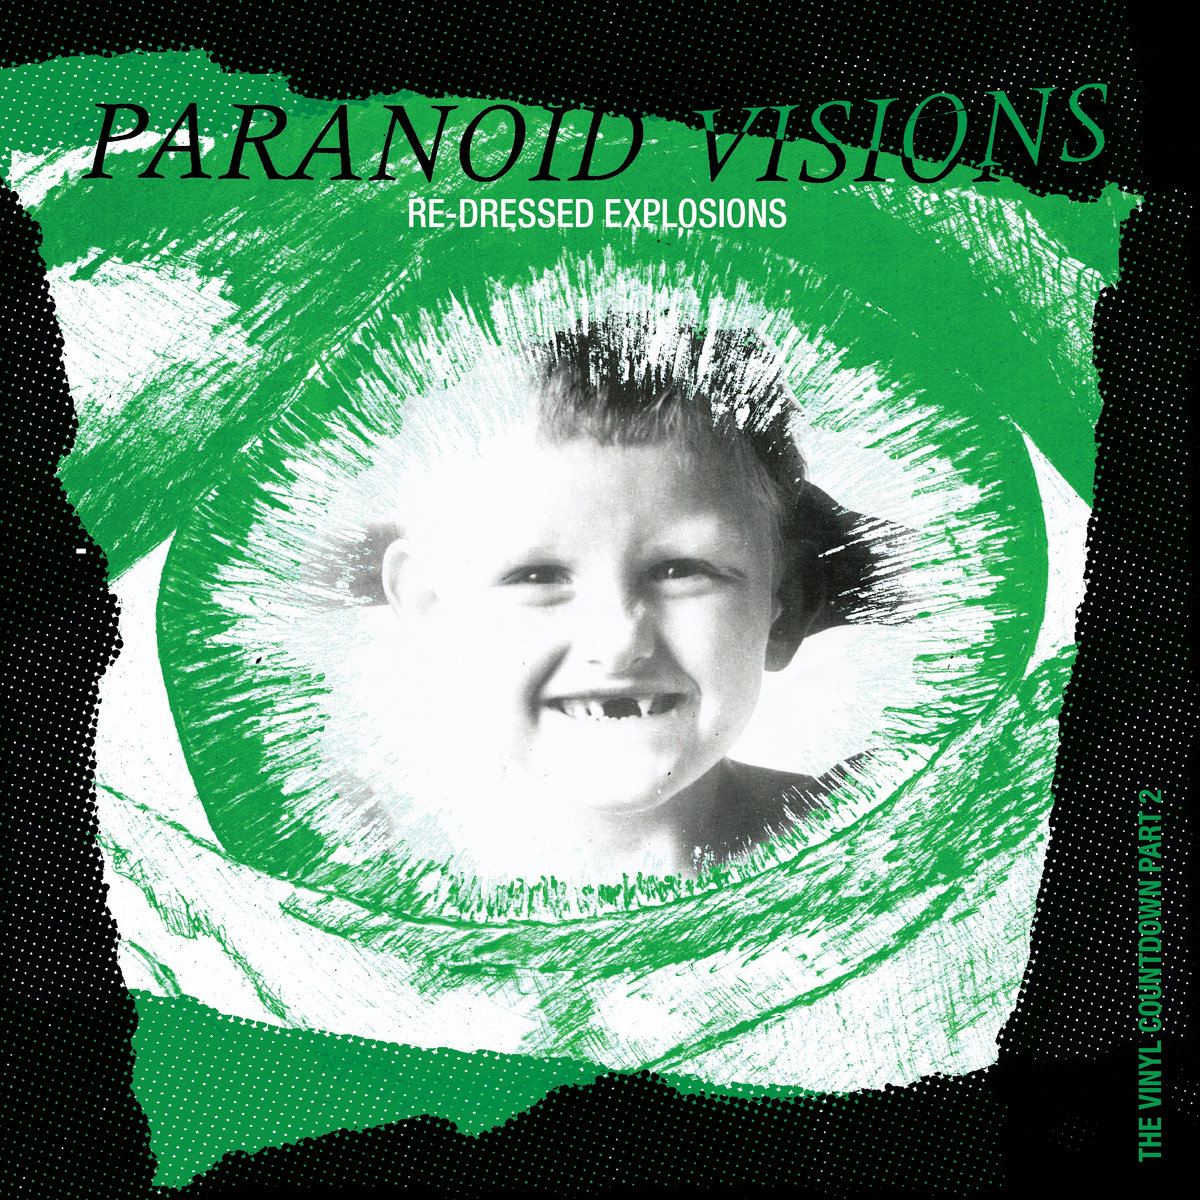 PARANOID VISIONS "Re-dressed explosions" - Double 33T